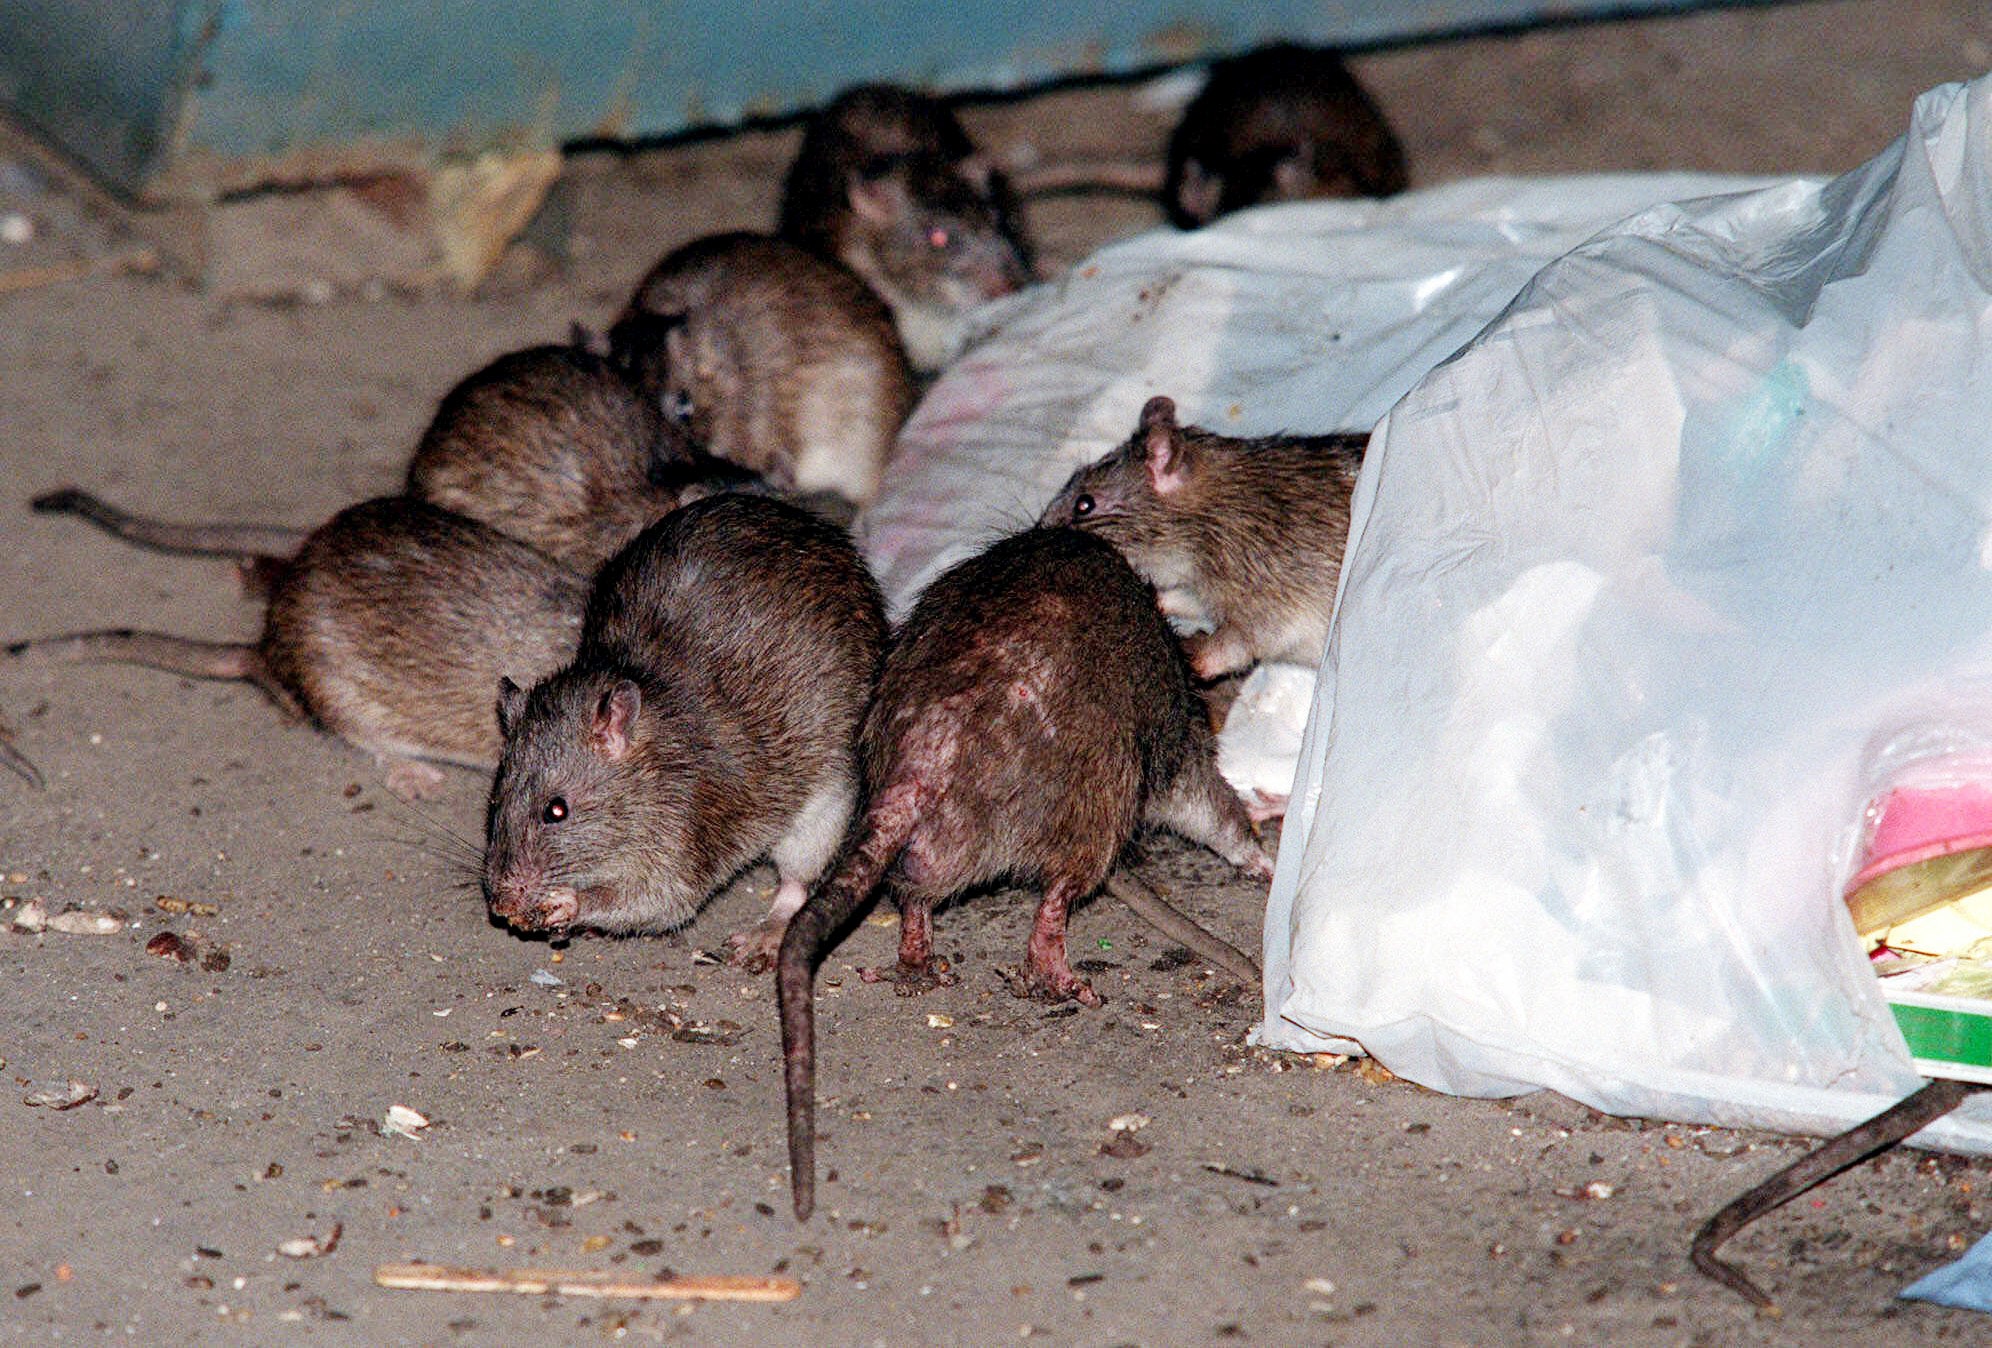 Rat tales abound in NYC after Sandy, but some experts skeptical about